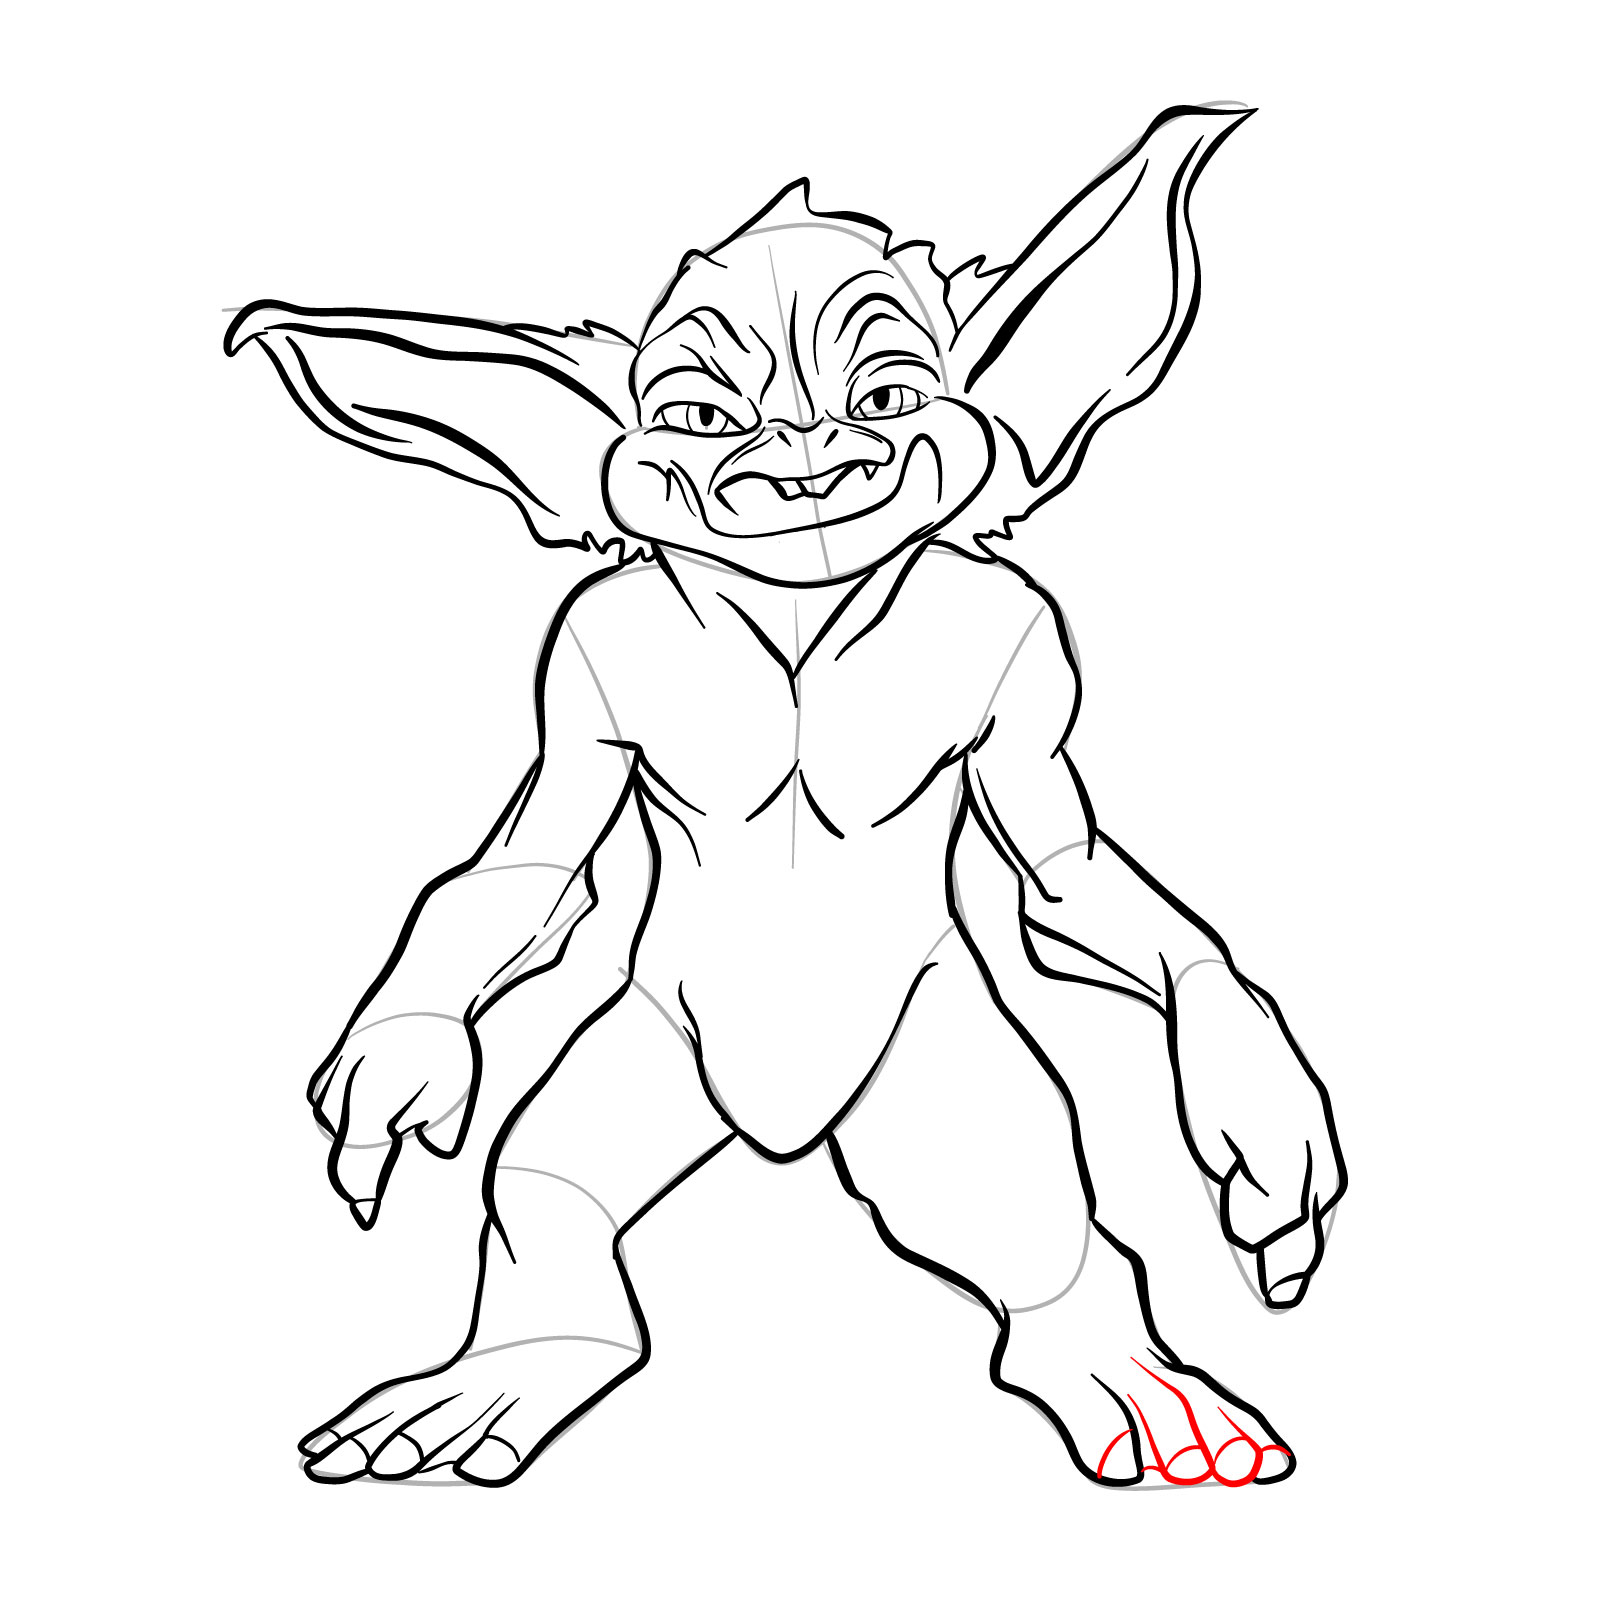 How to draw a Goblin - step 28